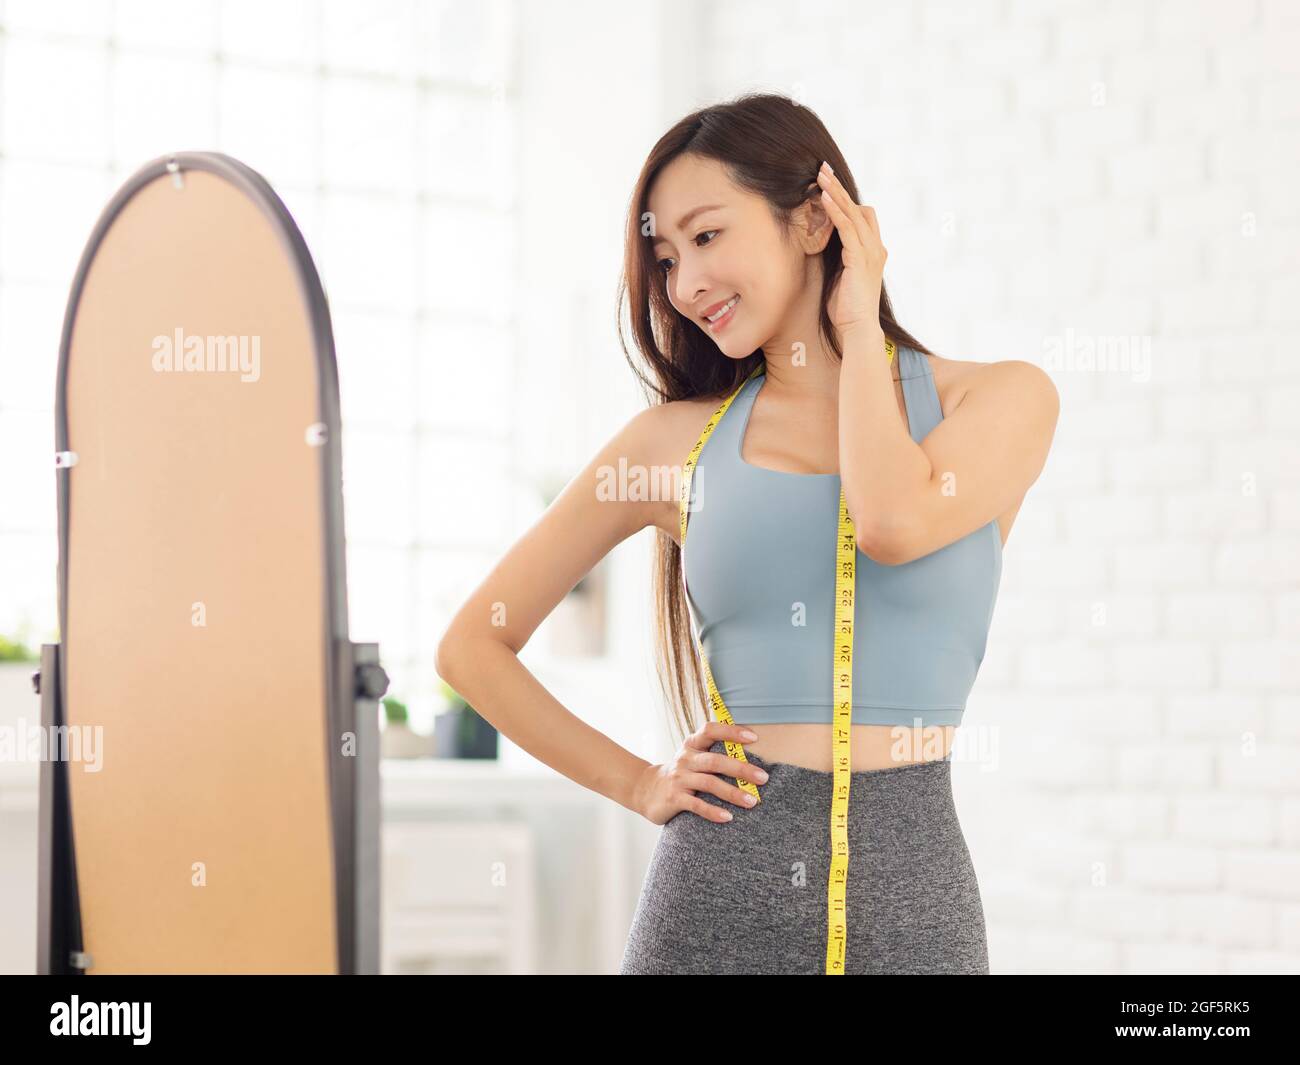 Young woman with tape standing in front of mirror.Weight Loss. Stock Photo